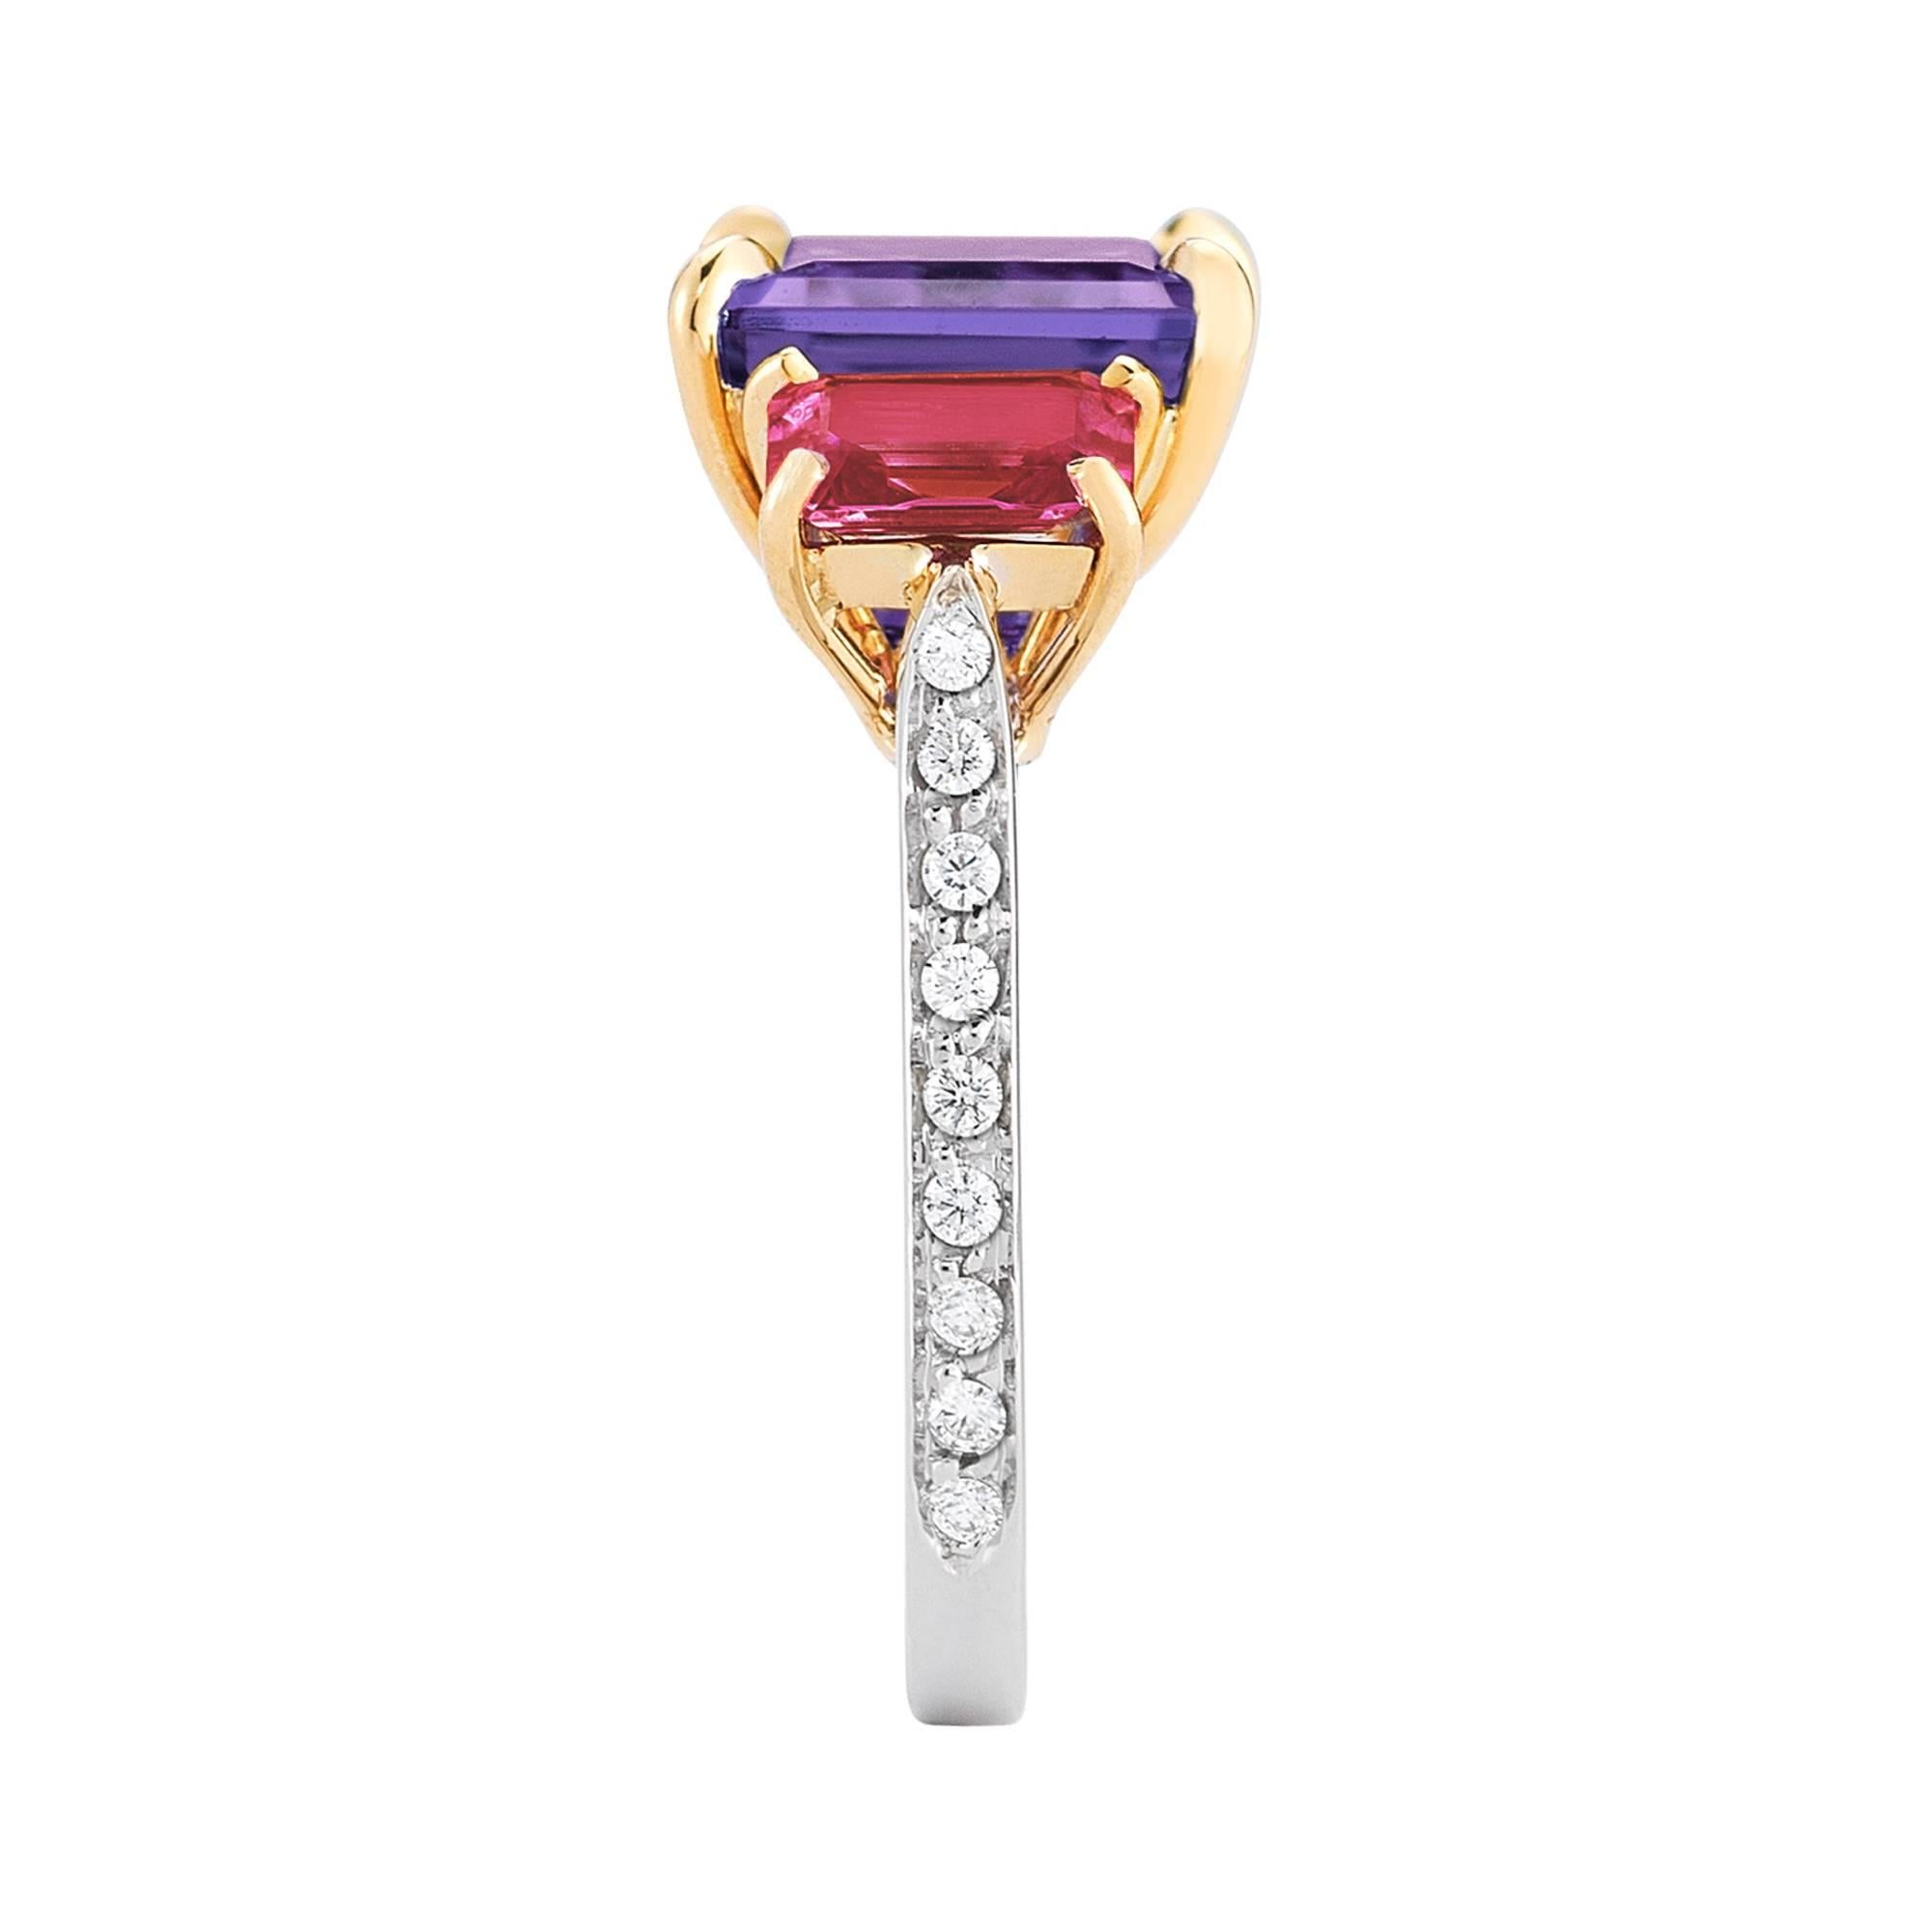 Contemporary Paolo Costagli 18 Karat Gold Amethyst 6.00 Carat and Ruby 1.36 Carat Ring